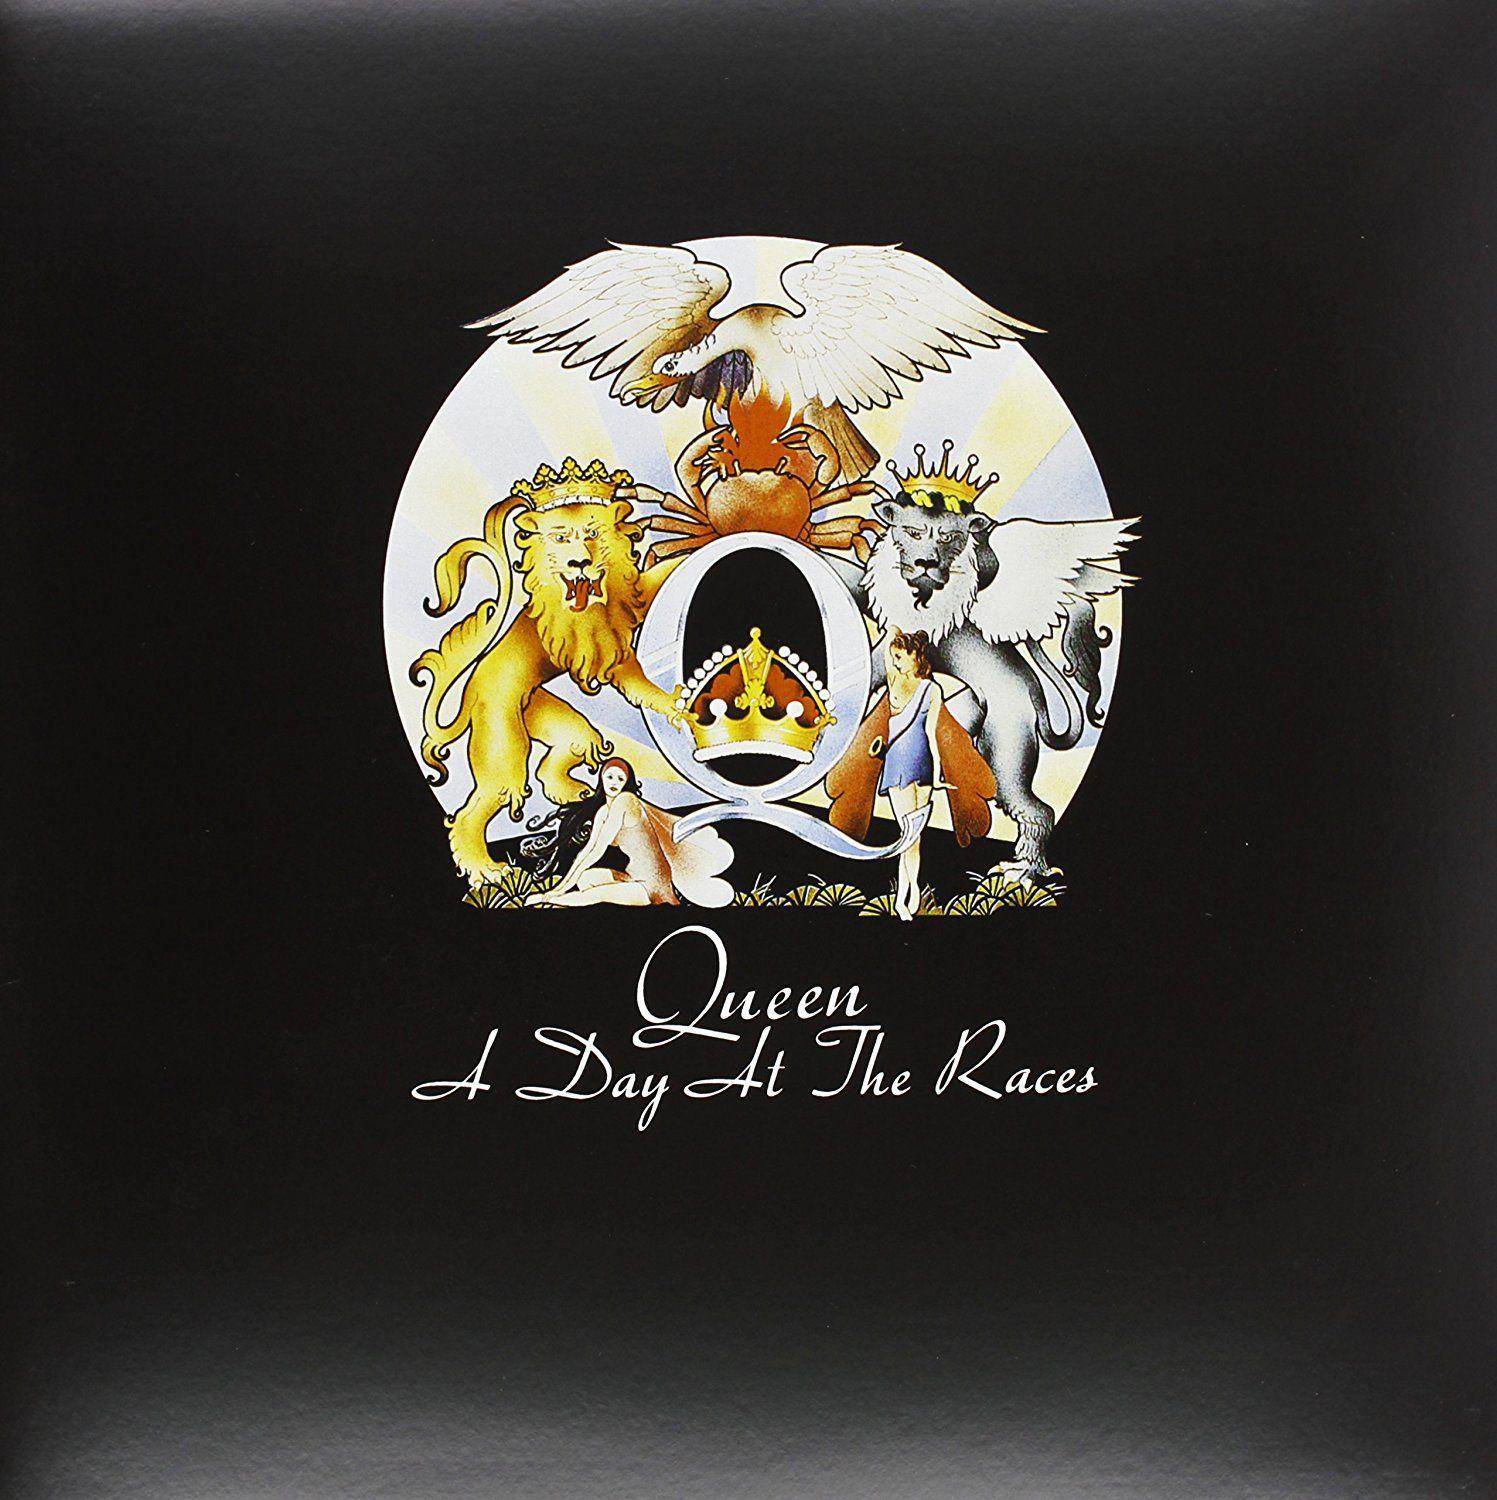 Queen Day at the Races [Vinyl].com Music